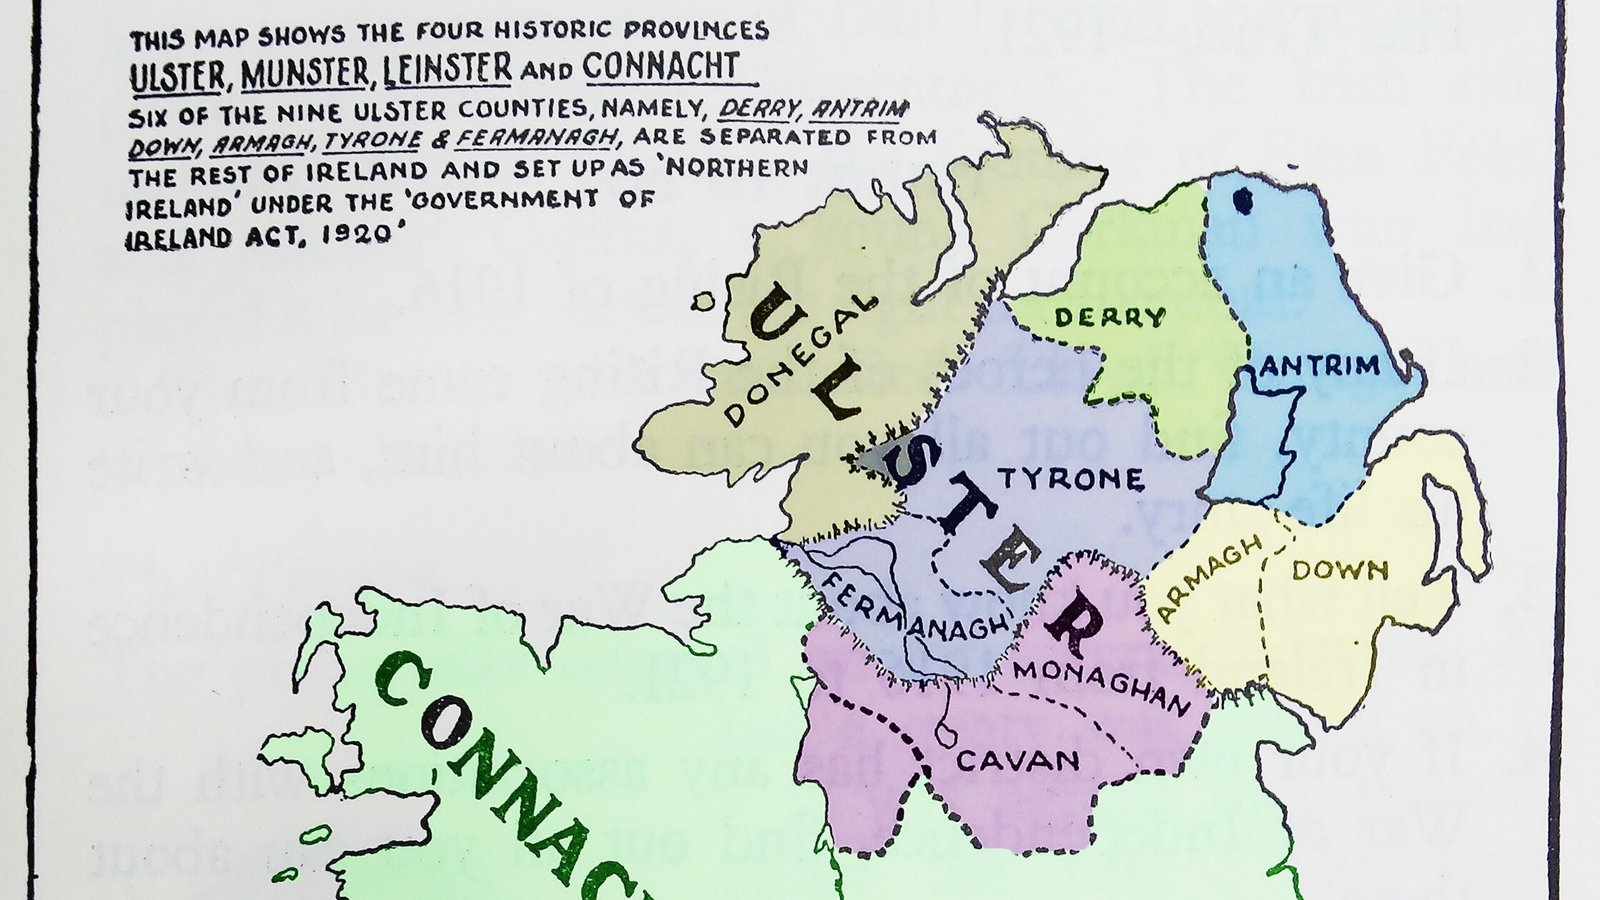 Image - A contemporary map showing the division of Ireland - and of Ulster Source: Photo 12/Universal Images Group via Getty Images)